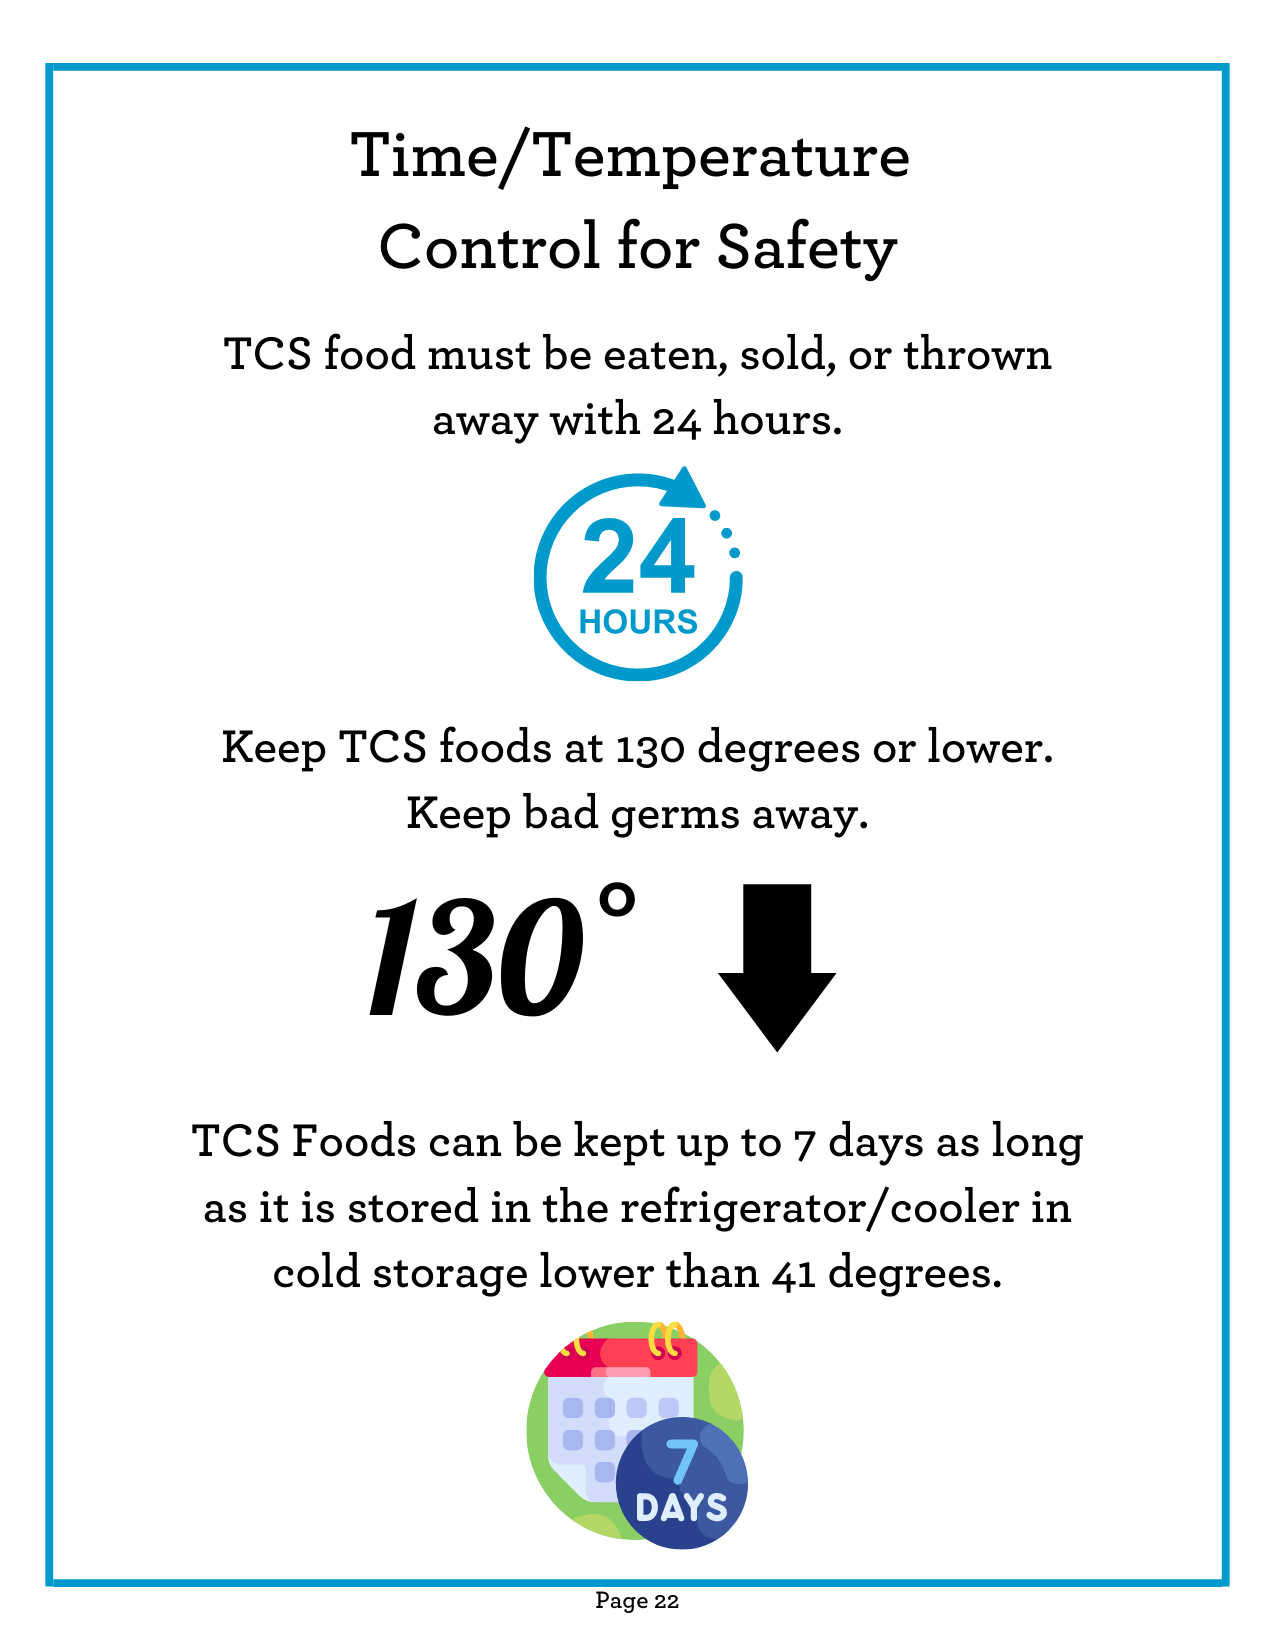 Time and Temperature Control (TCS) Food Guidelines